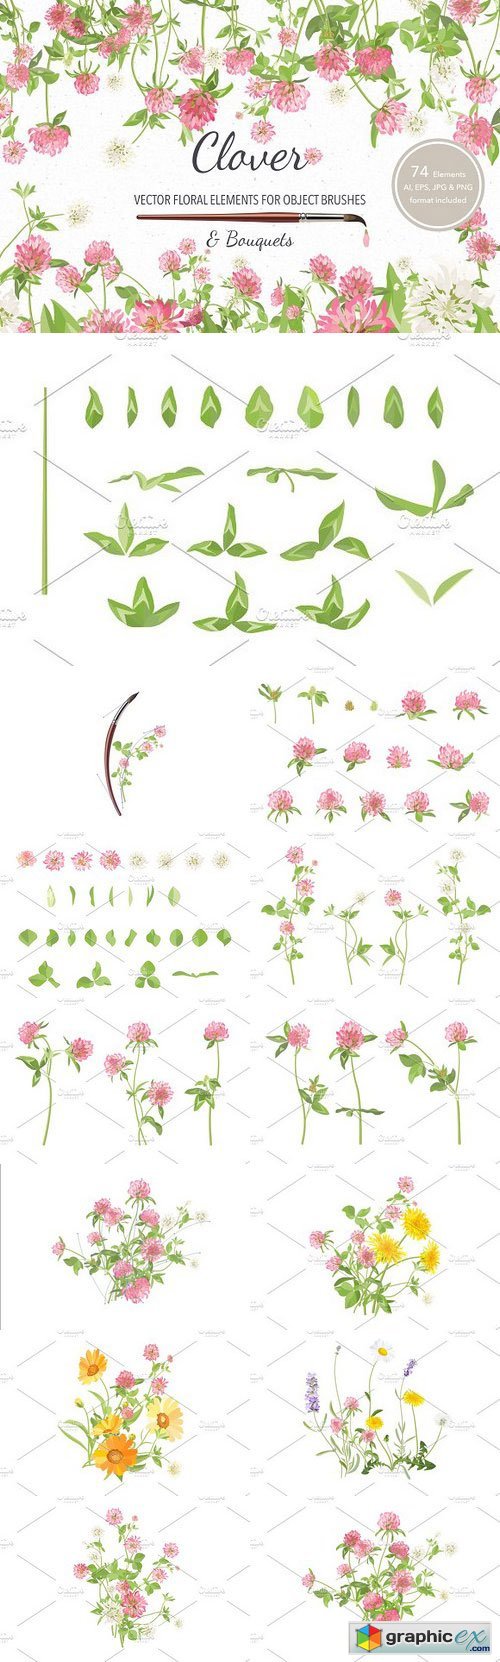 Vector object brushes. Clover